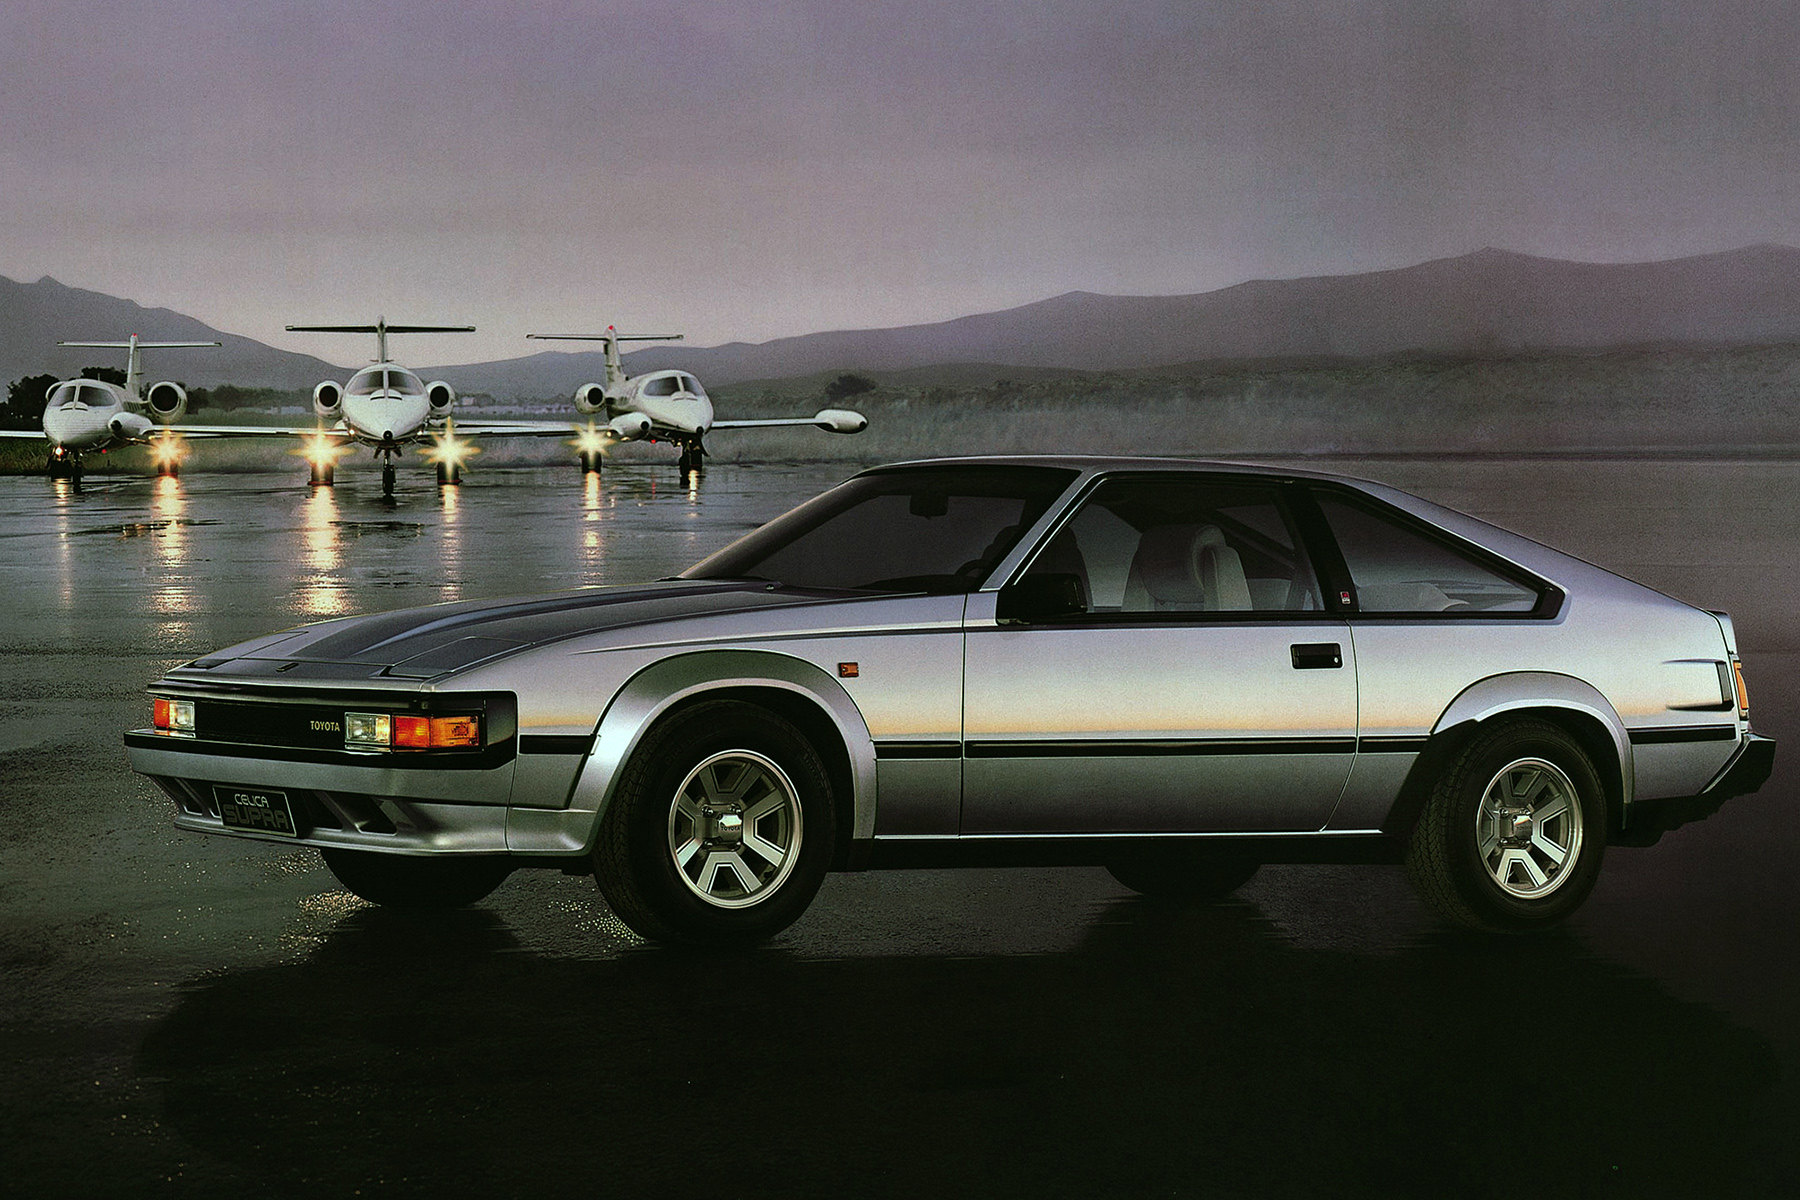 Supra heroes: the story of the Toyota Supra